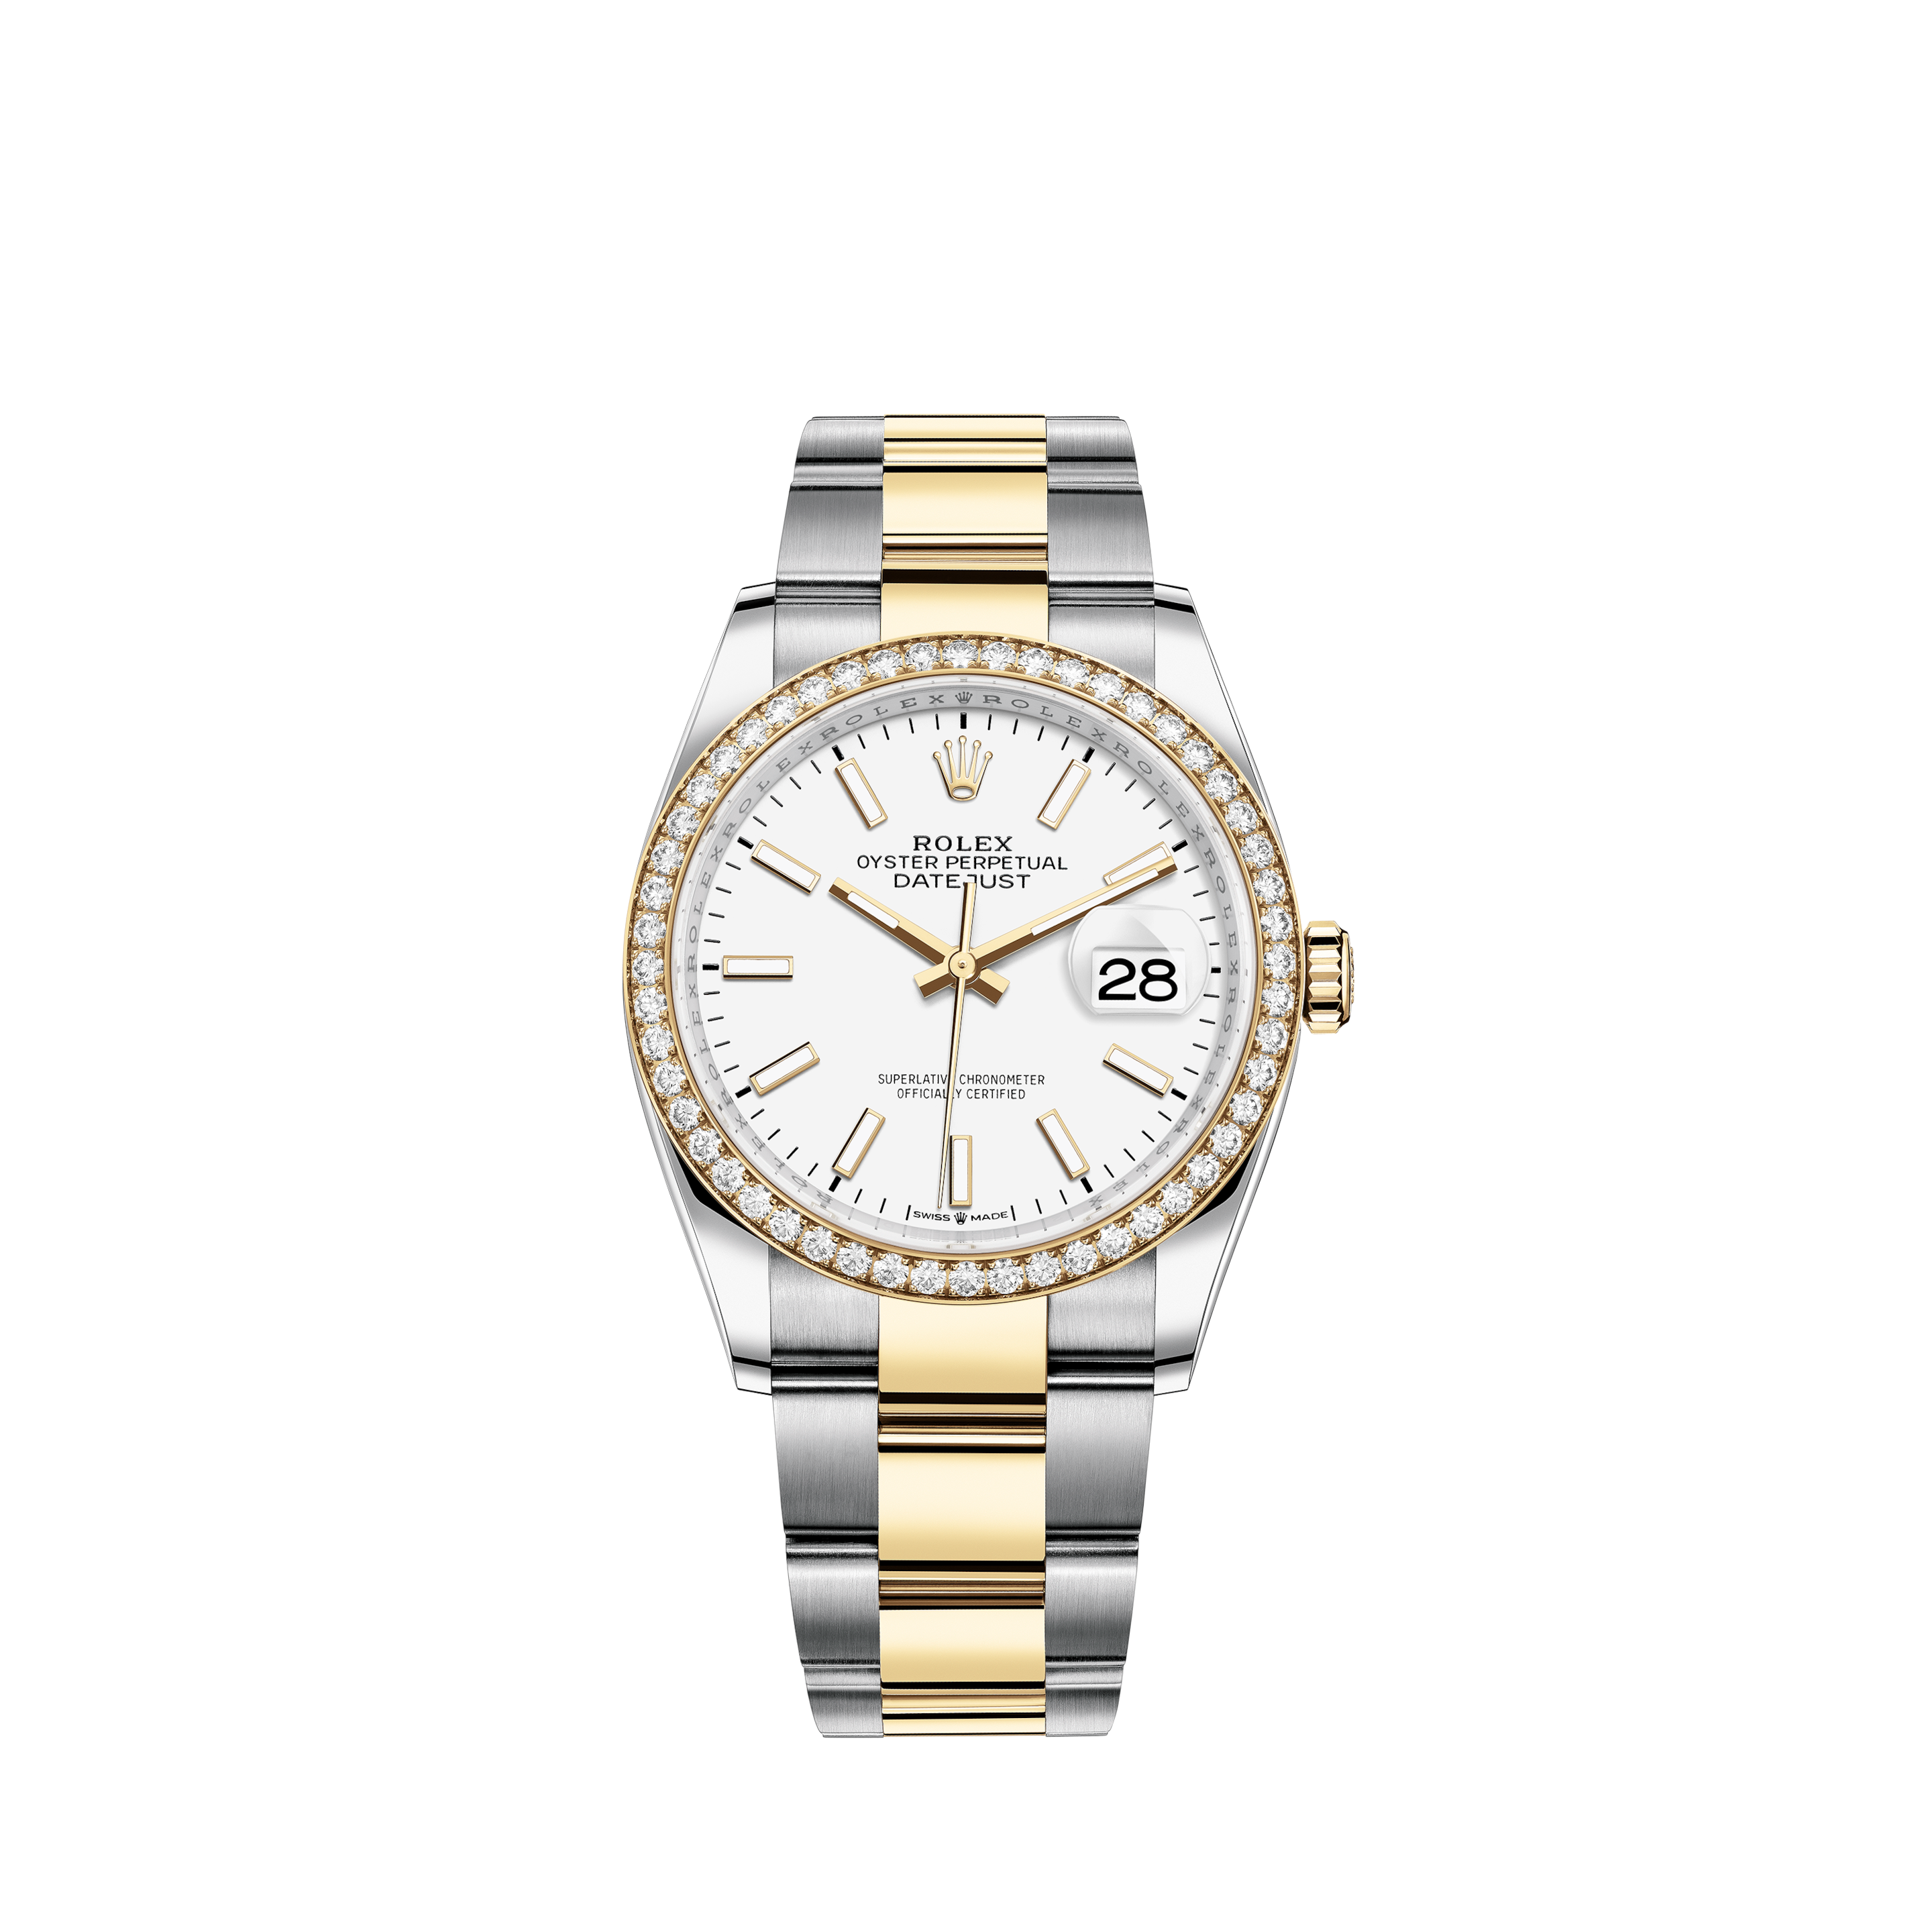 Rolex 2019 PAPERS Rolex DateJust 41 126333 Two Tone Gold Wimbledon Grey Watch Box2019 PAPERS Rolex DateJust 41 126333 Two Tone Gold Wimbledon Grey Wa###Rolex Datejust 41mm Fluted White Stick Dial Oyster 126334